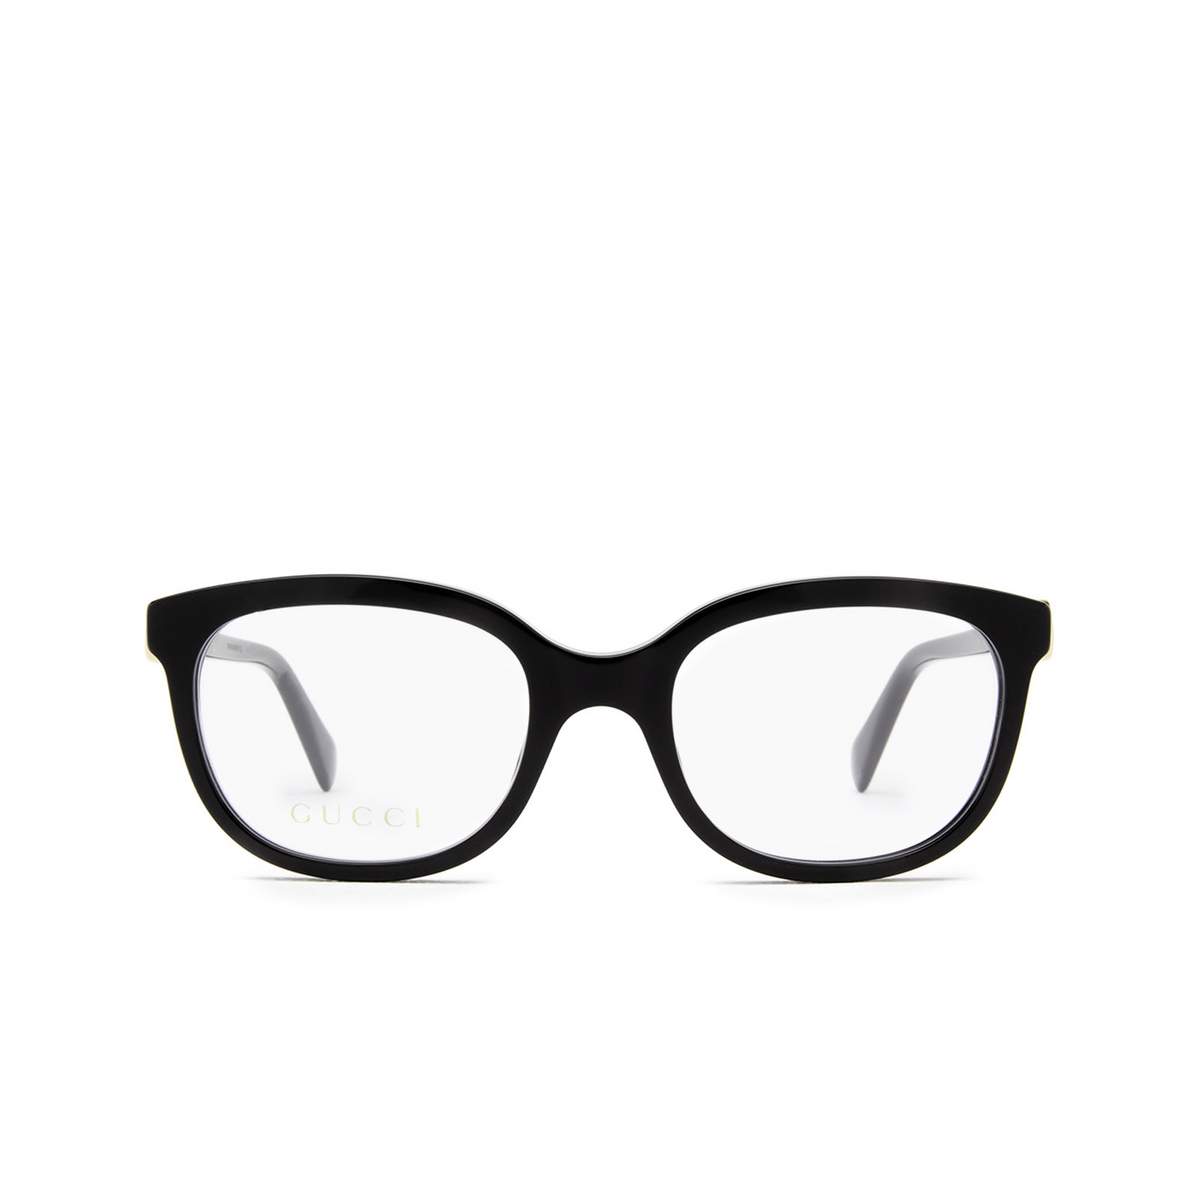 Gucci® Rectangle Eyeglasses: GG1075O color 001 Black - front view